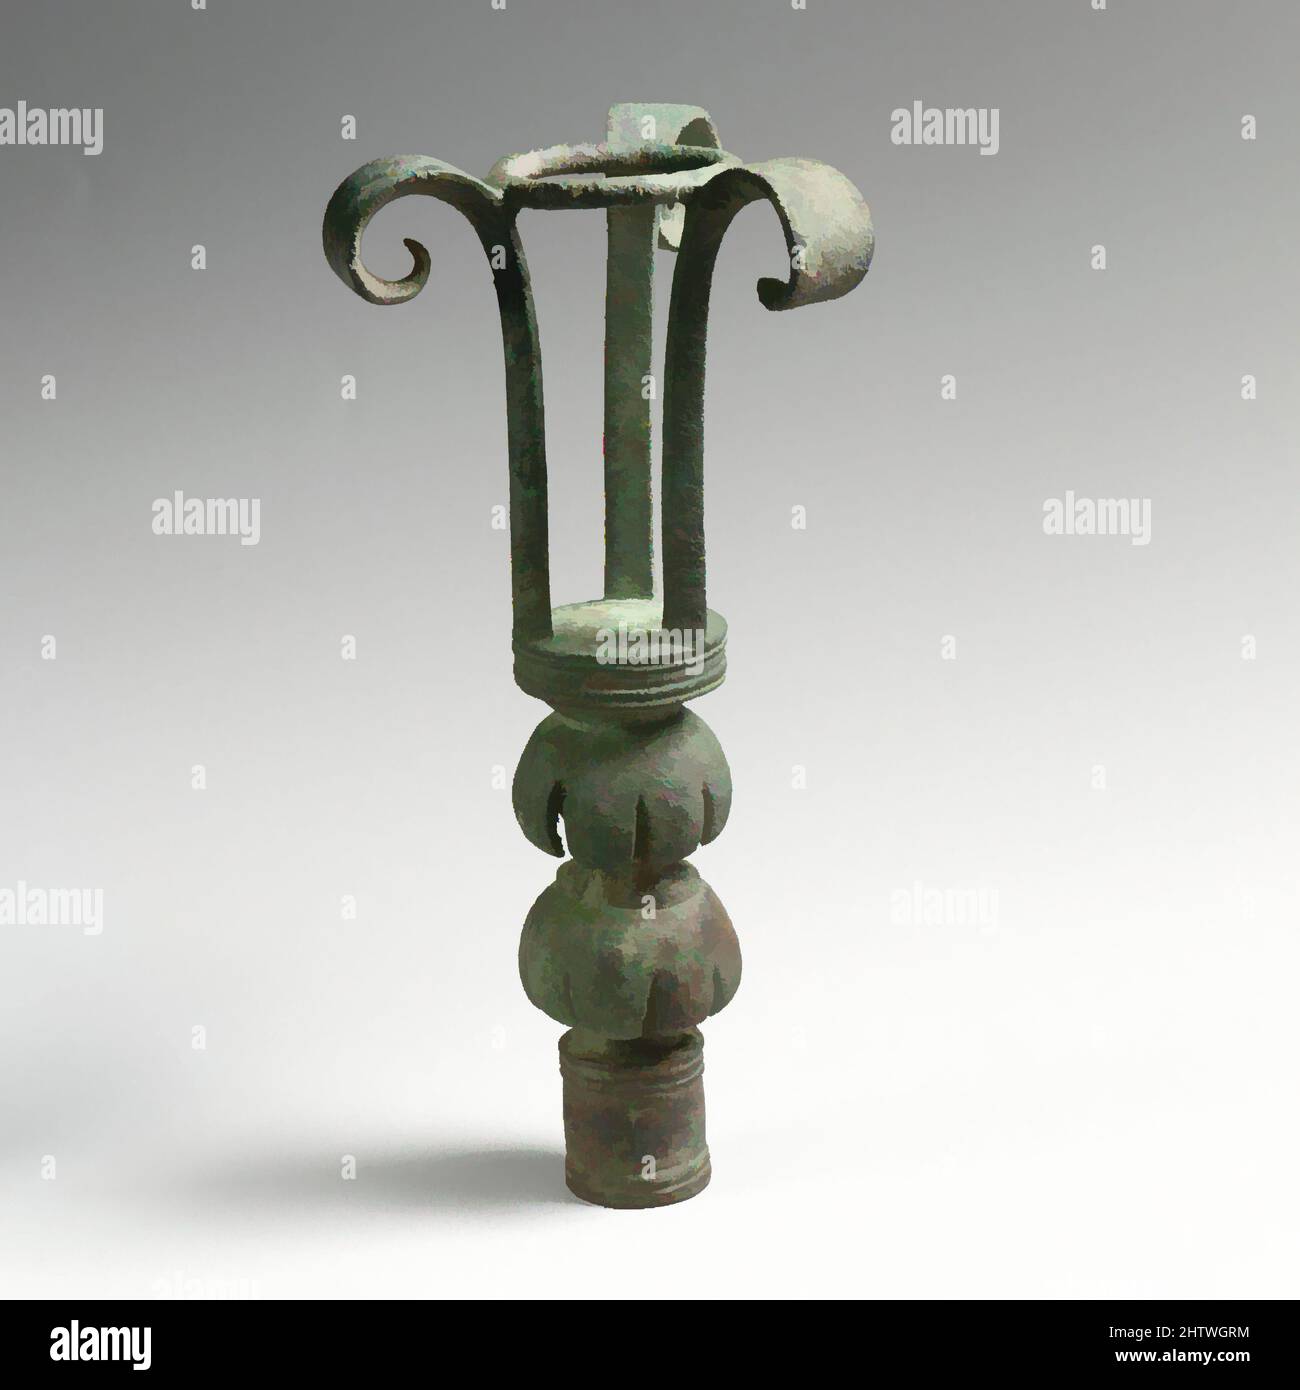 Art inspired by Bronze lampstand, Cypro-Archaic, 6th century B.C., Cypriot, Bronze, H.: 8 in. (20.3 cm), Bronzes, Short stem decorated with two rows of lotus petals, Classic works modernized by Artotop with a splash of modernity. Shapes, color and value, eye-catching visual impact on art. Emotions through freedom of artworks in a contemporary way. A timeless message pursuing a wildly creative new direction. Artists turning to the digital medium and creating the Artotop NFT Stock Photo